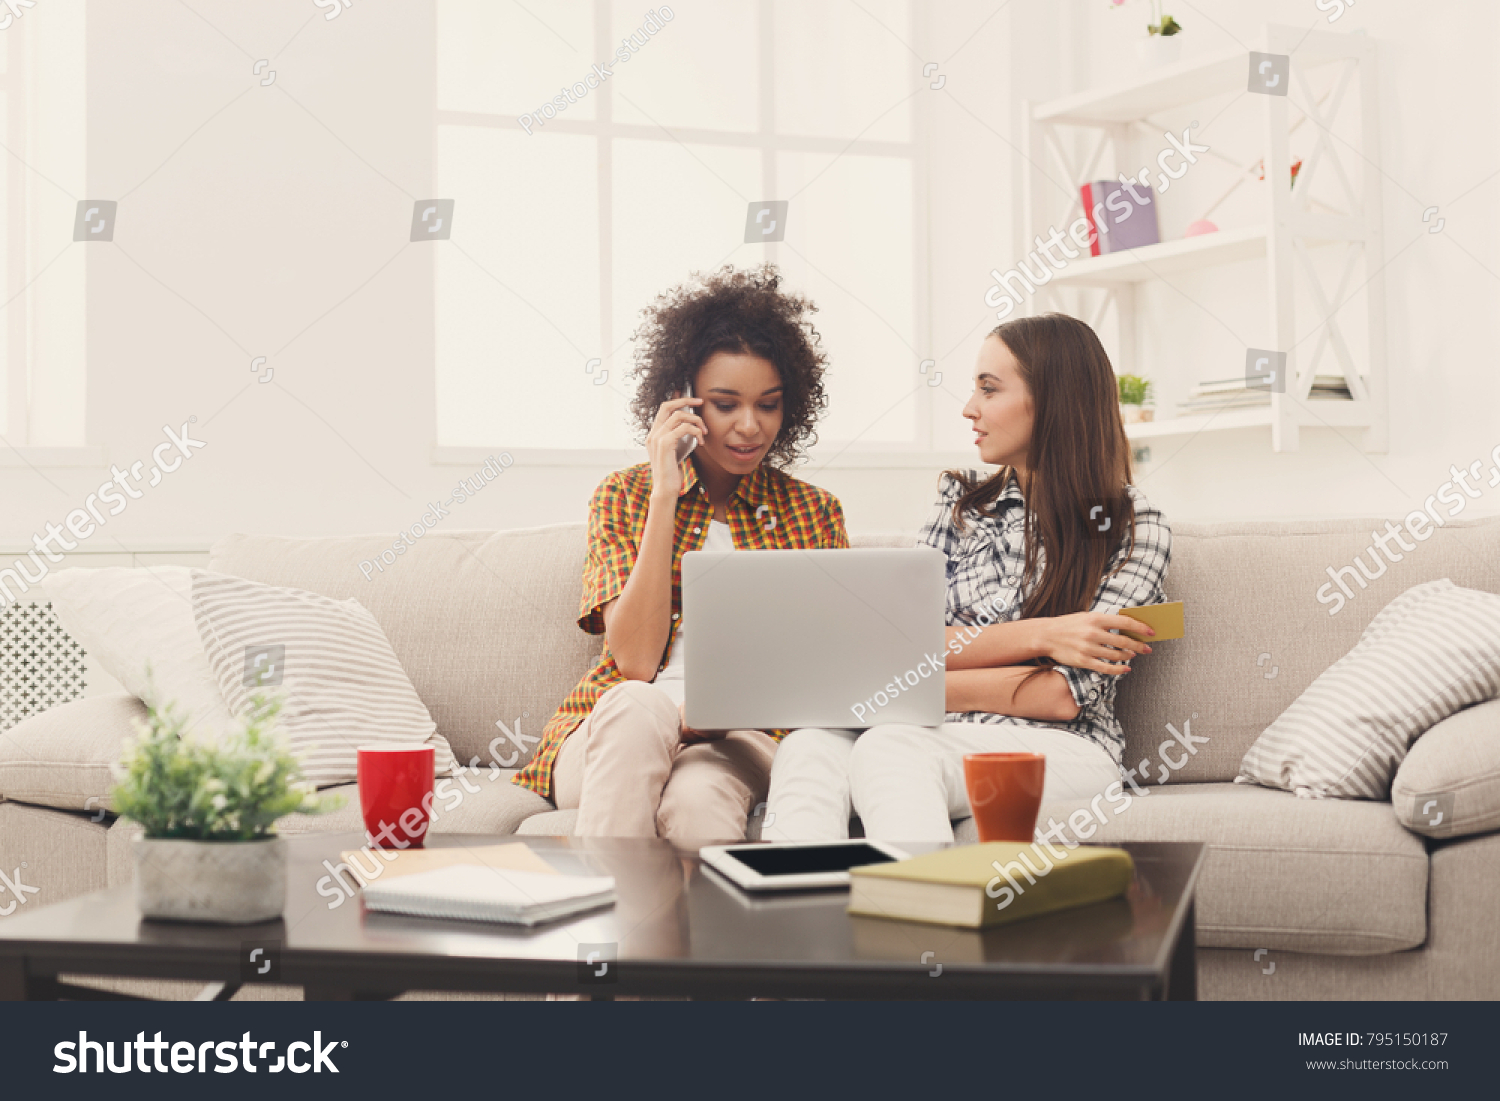 Two happy women shopping online with credit card and laptop sitting on sofa at home and making order by mobile phone, copy space #795150187